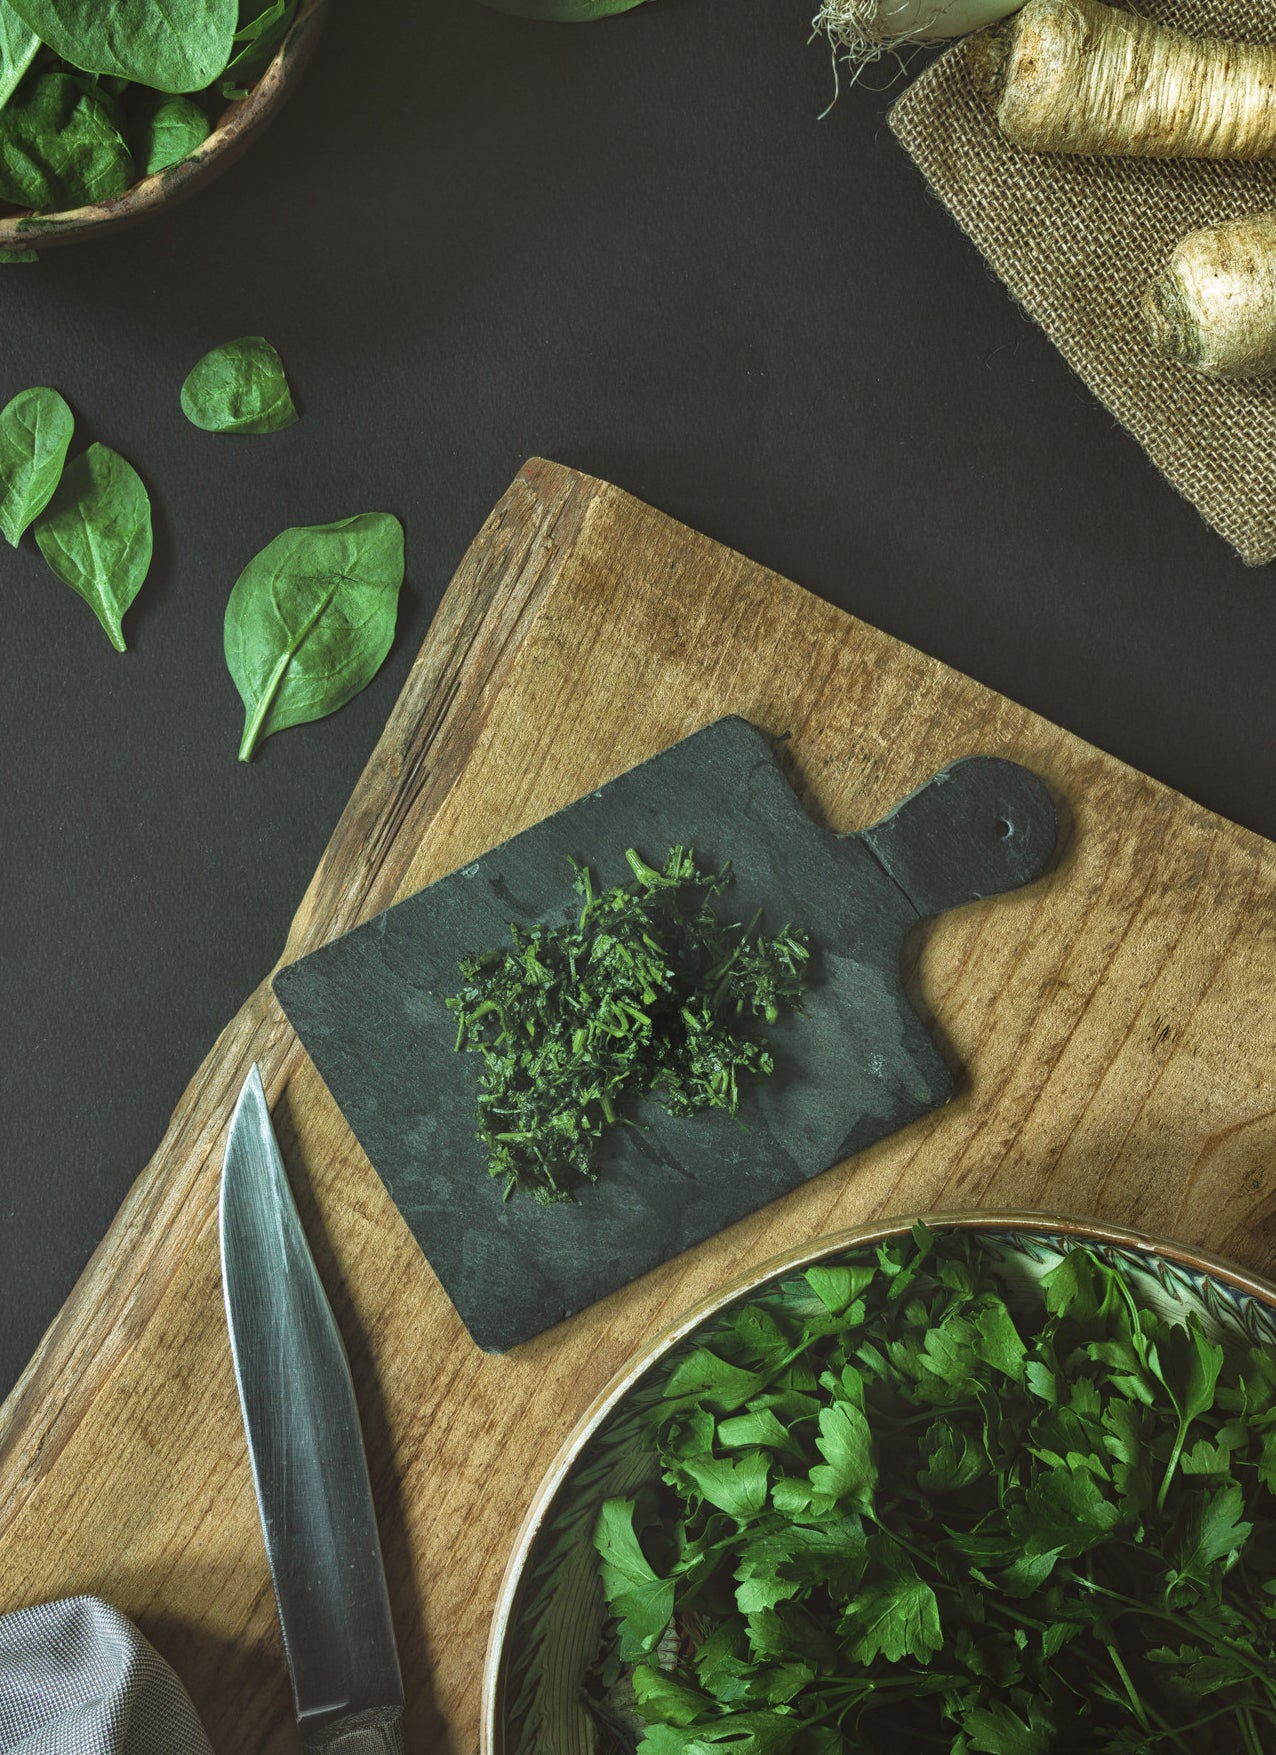 Chopped herbs on a wooden cutting board.